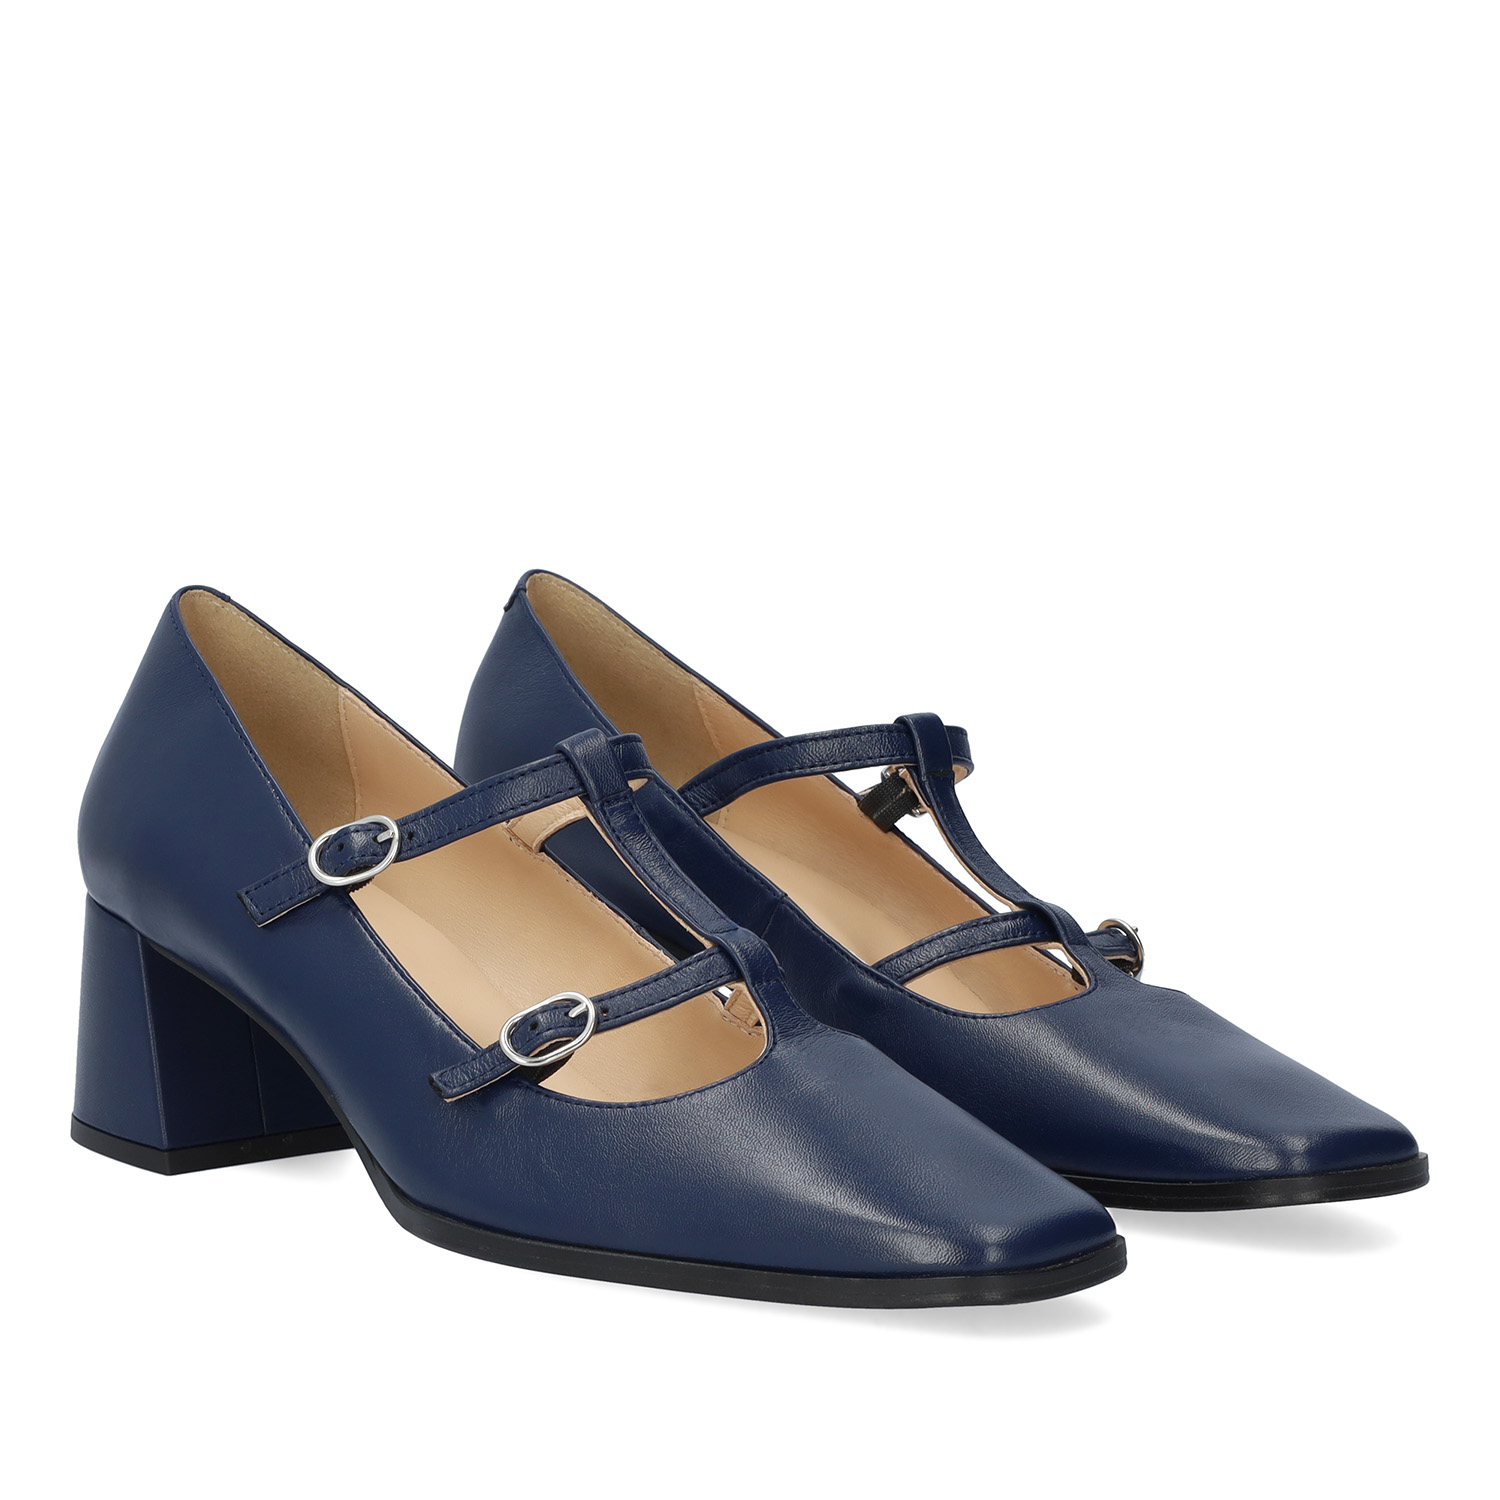 Court navy leather heeled shoes. 